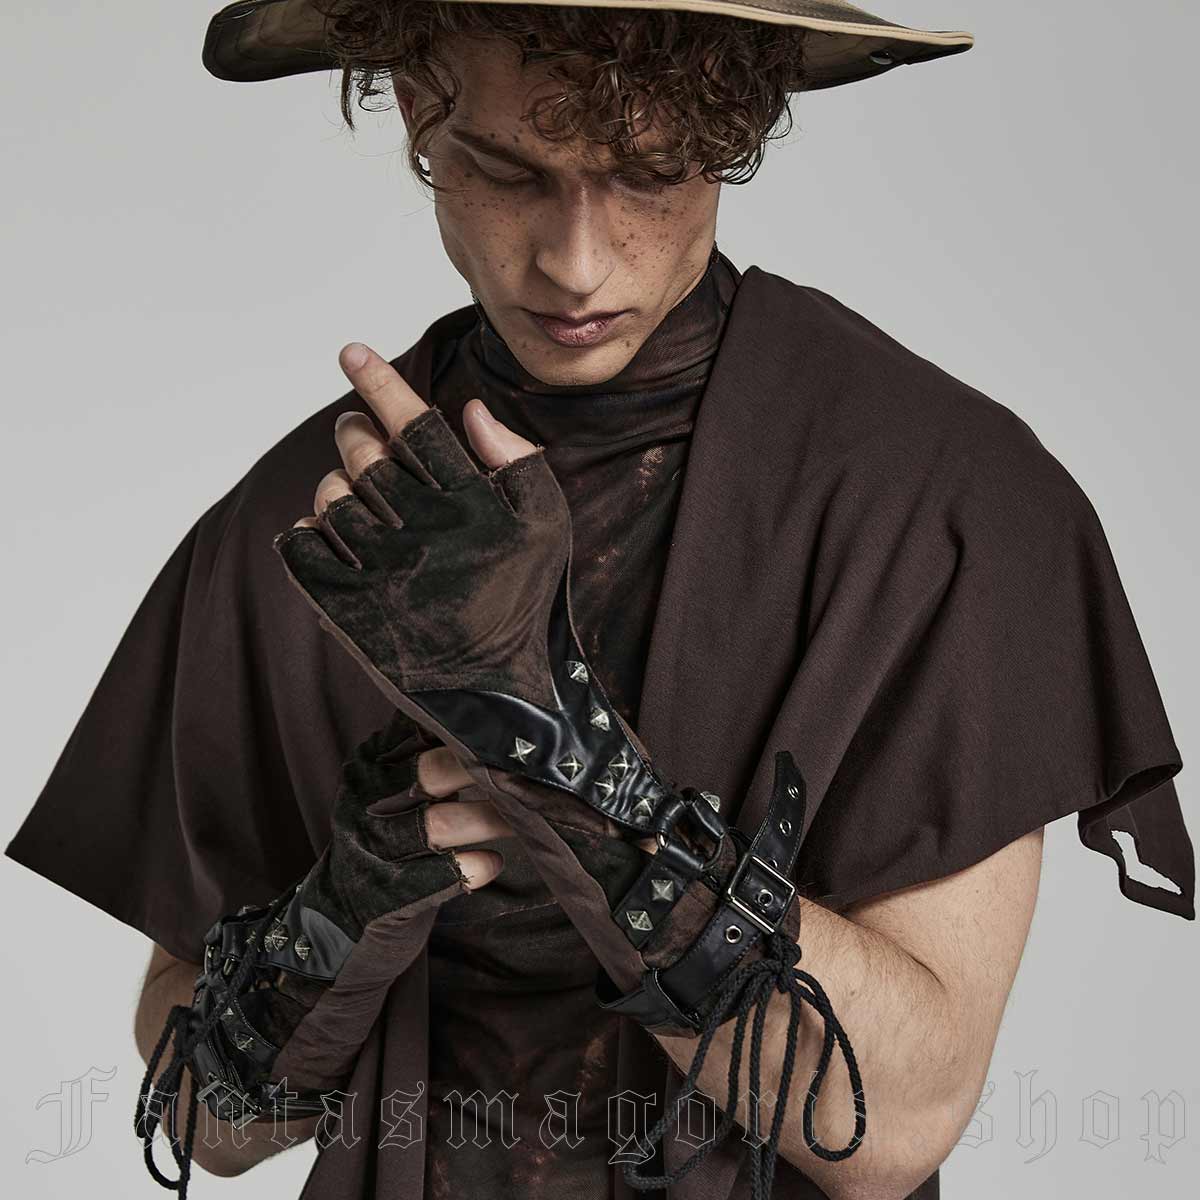 Men's Punk fingerless O-ring and straps pyramid studs brown and black gloves. - Punk Rave - WS-538DQM/BK-CO